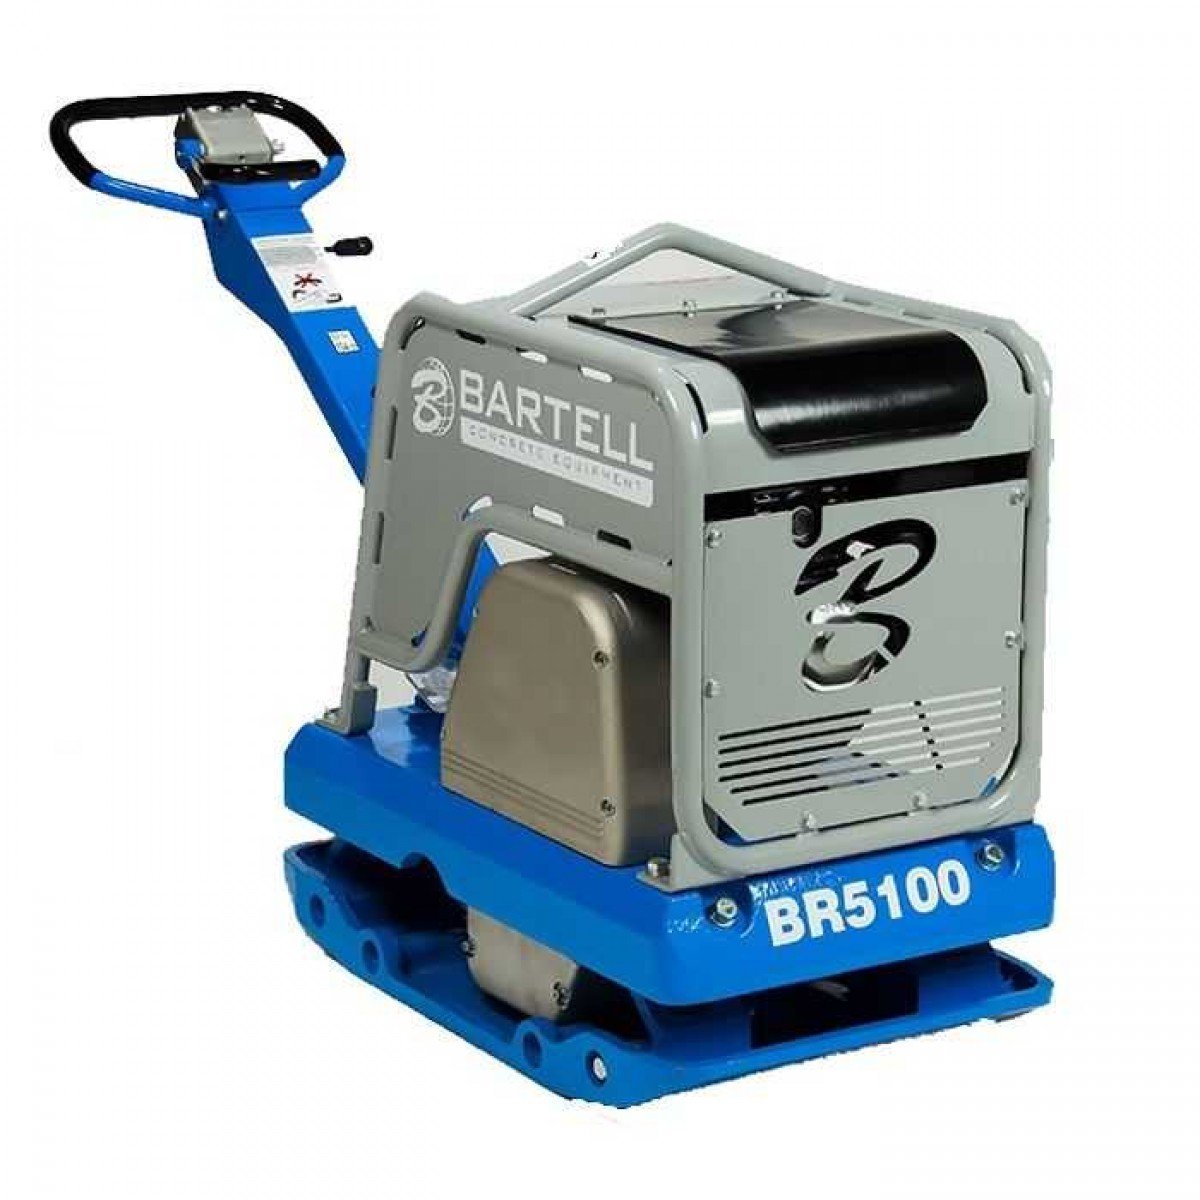 BR 5100 Reversible Compactor - Bartell Global